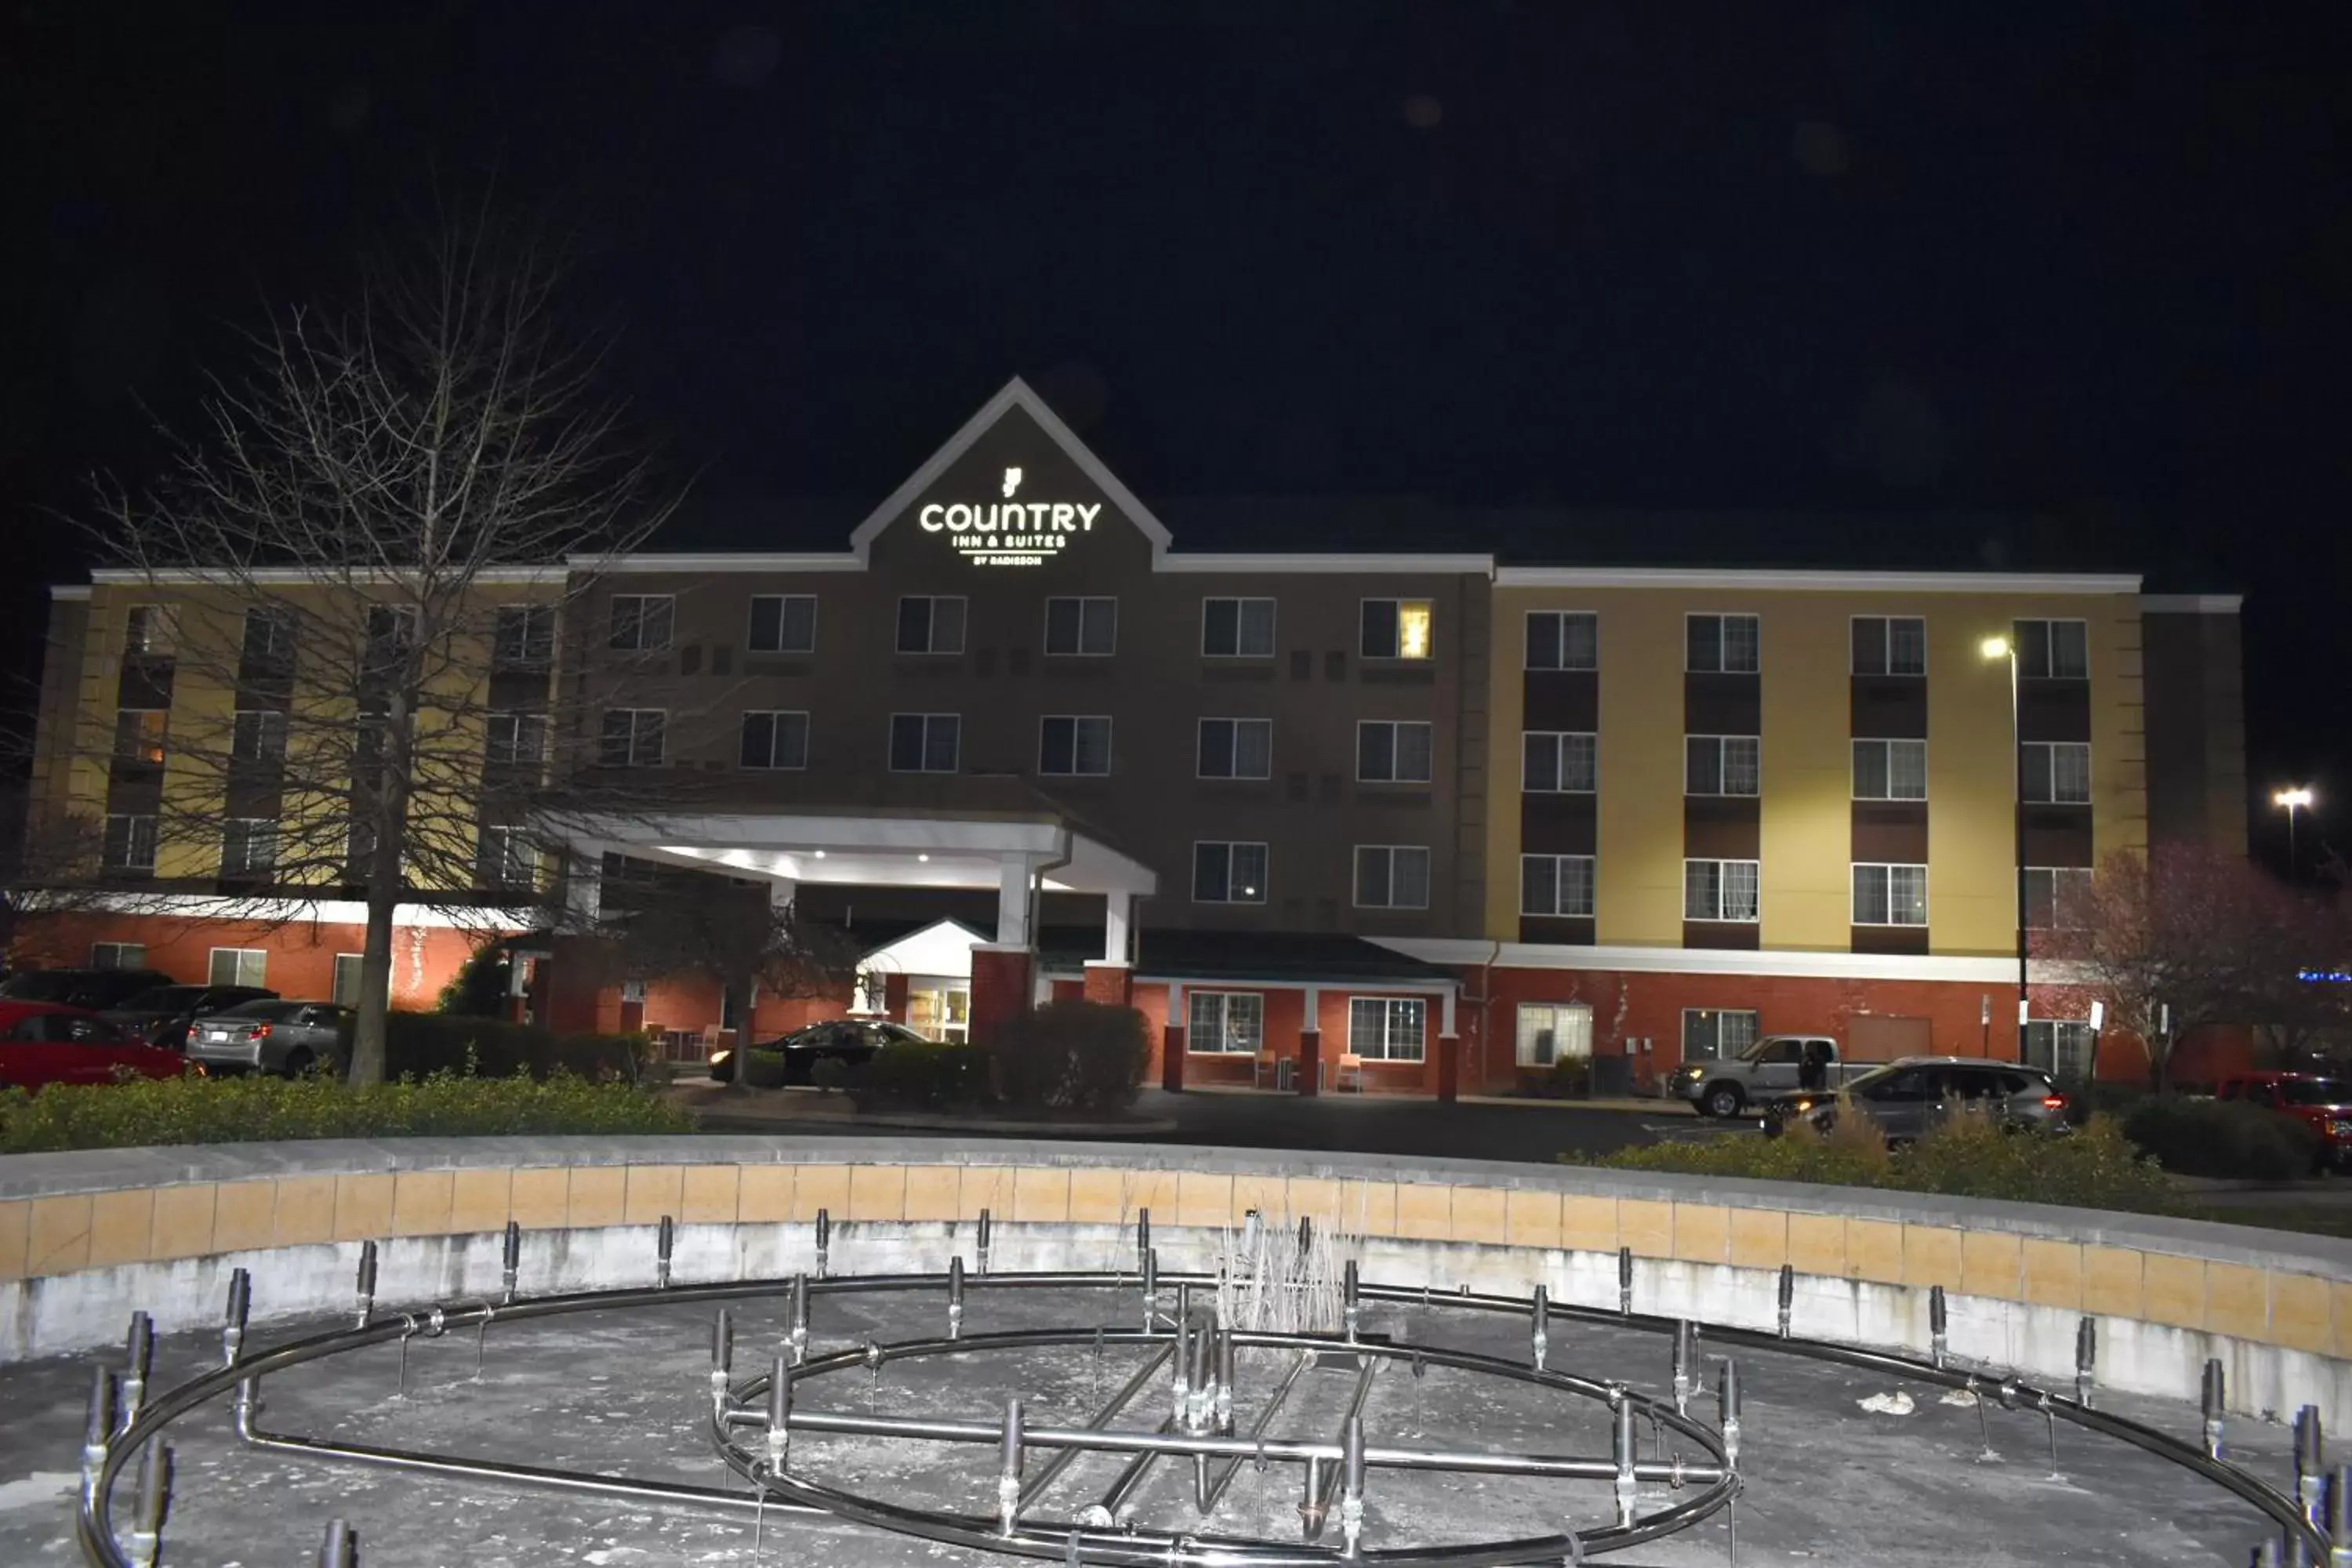 Property Building in Country Inn & Suites by Radisson, Hagerstown, MD